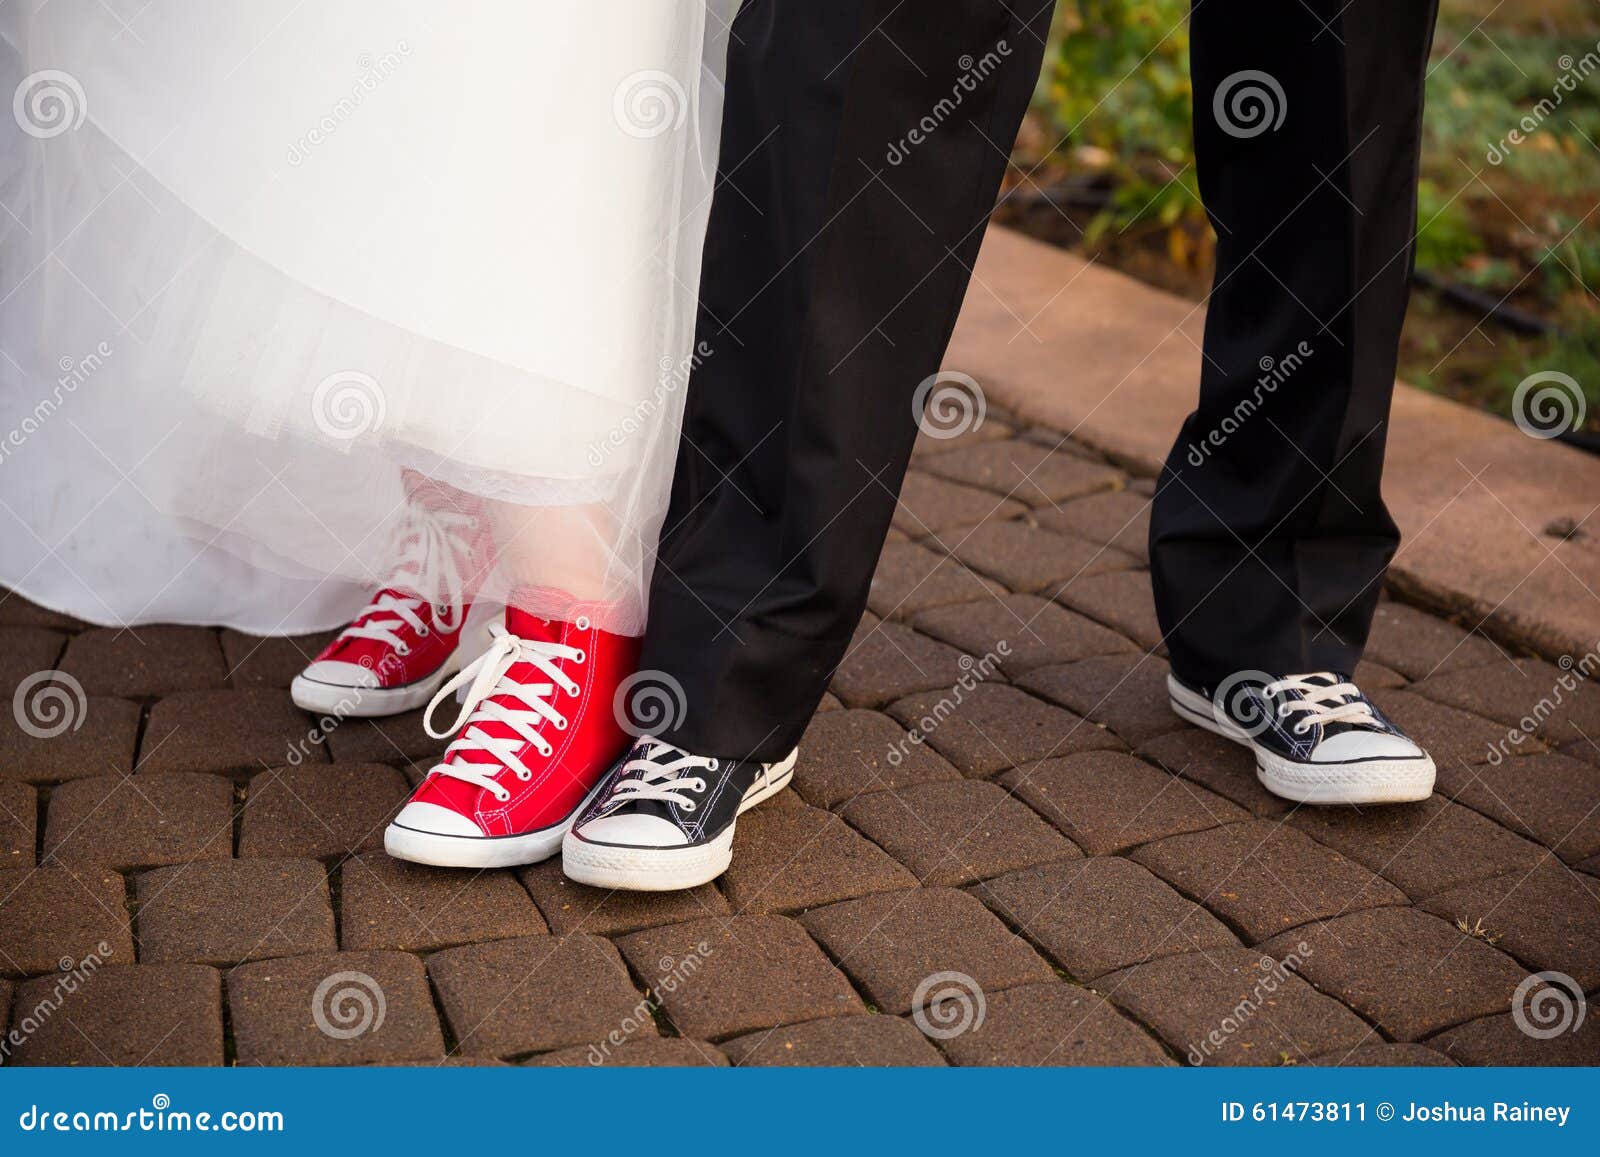 wearing converse on wedding day